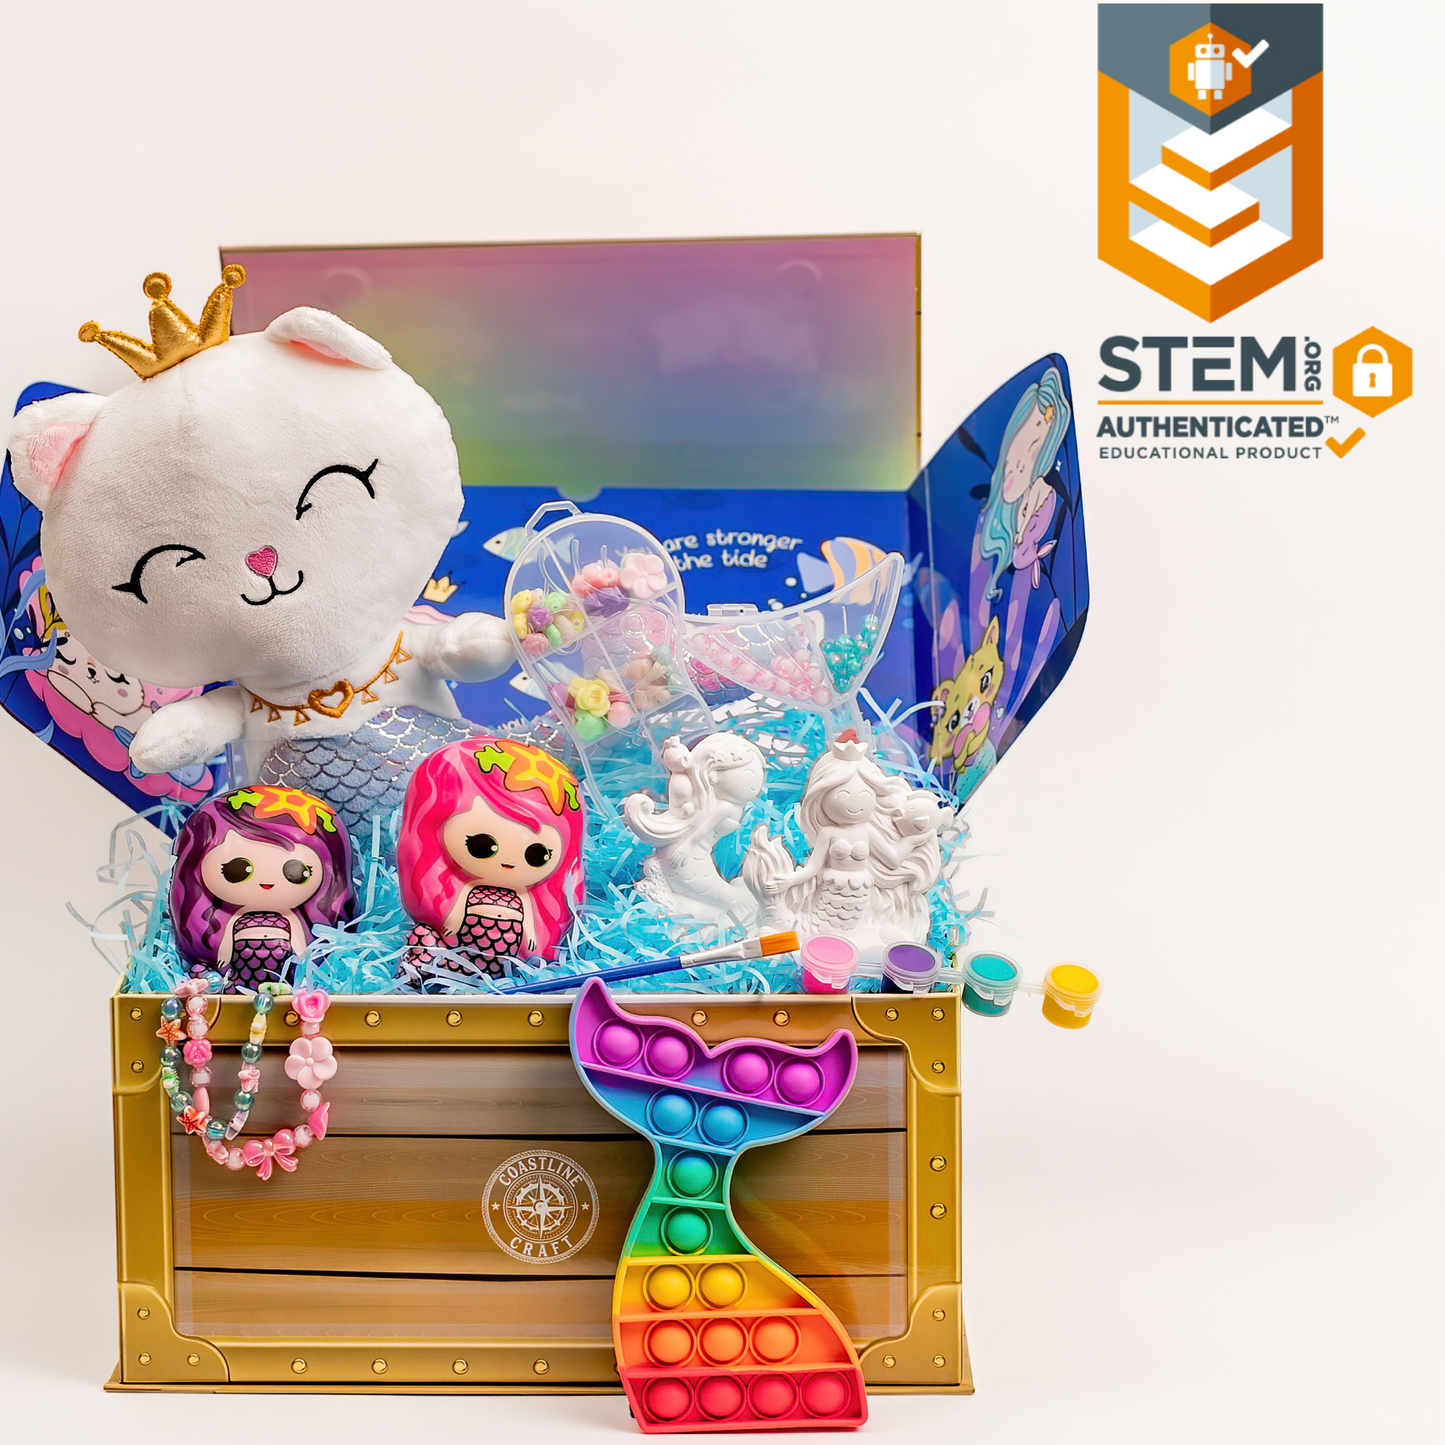 STEM-CERTIFIED COASTLINE CRAFT Mermaid Gift Set for Girls - Soft Mercat Plush Toy with Painting Kit, Mermaid Squishy, Pop it Toy & More Screen-Free Play!